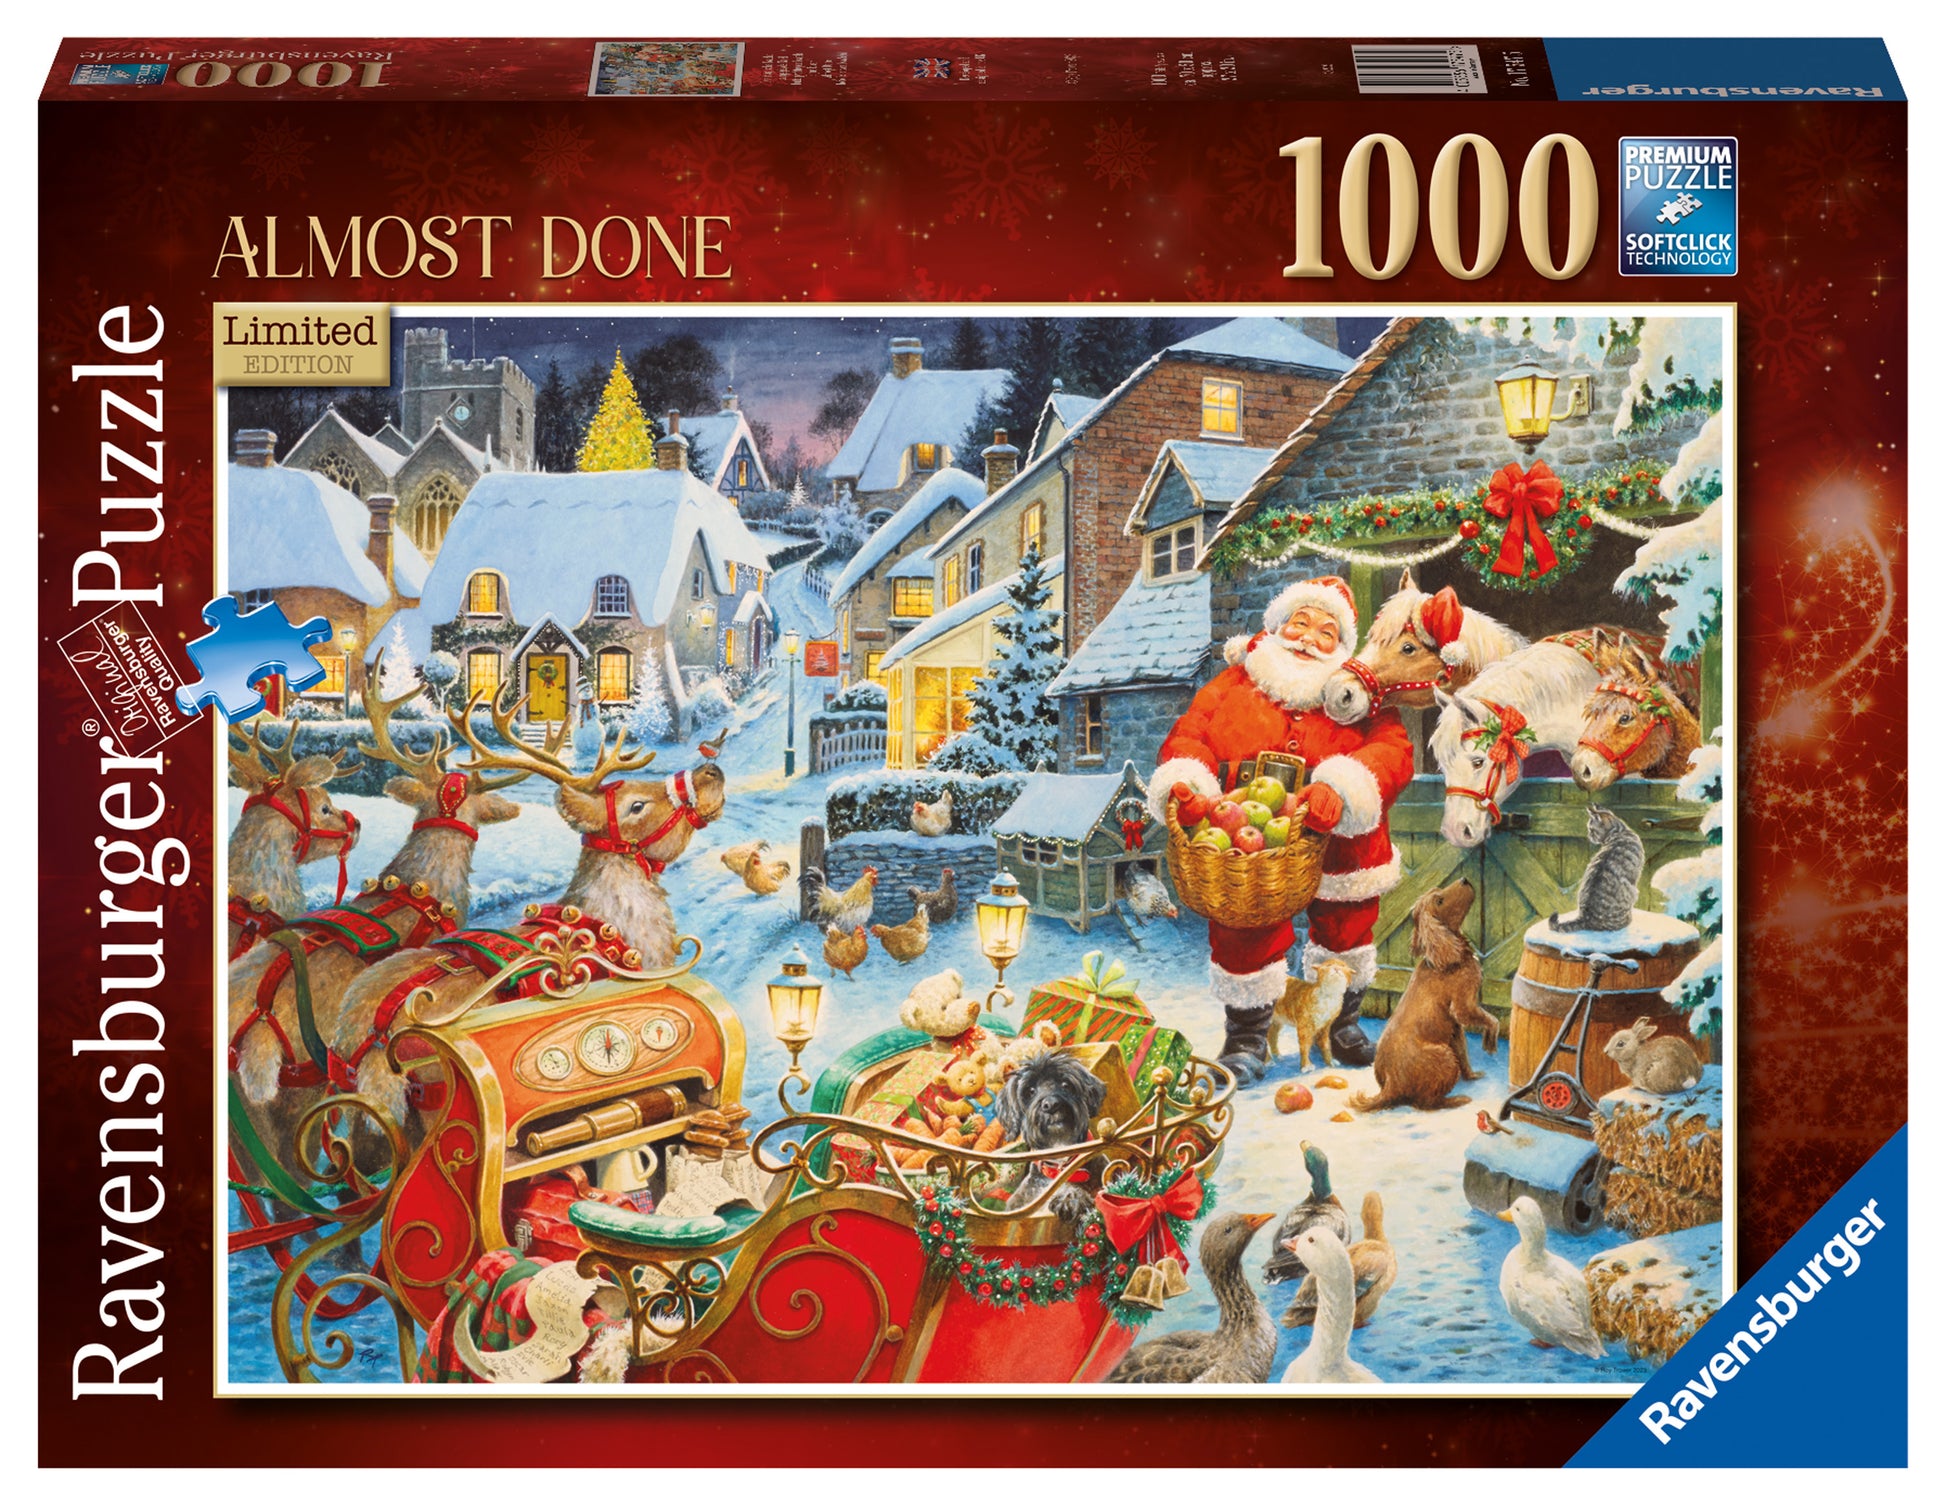 Ravensburger Christmas Puzzle "Almost Done" Limited Edition No.27 20